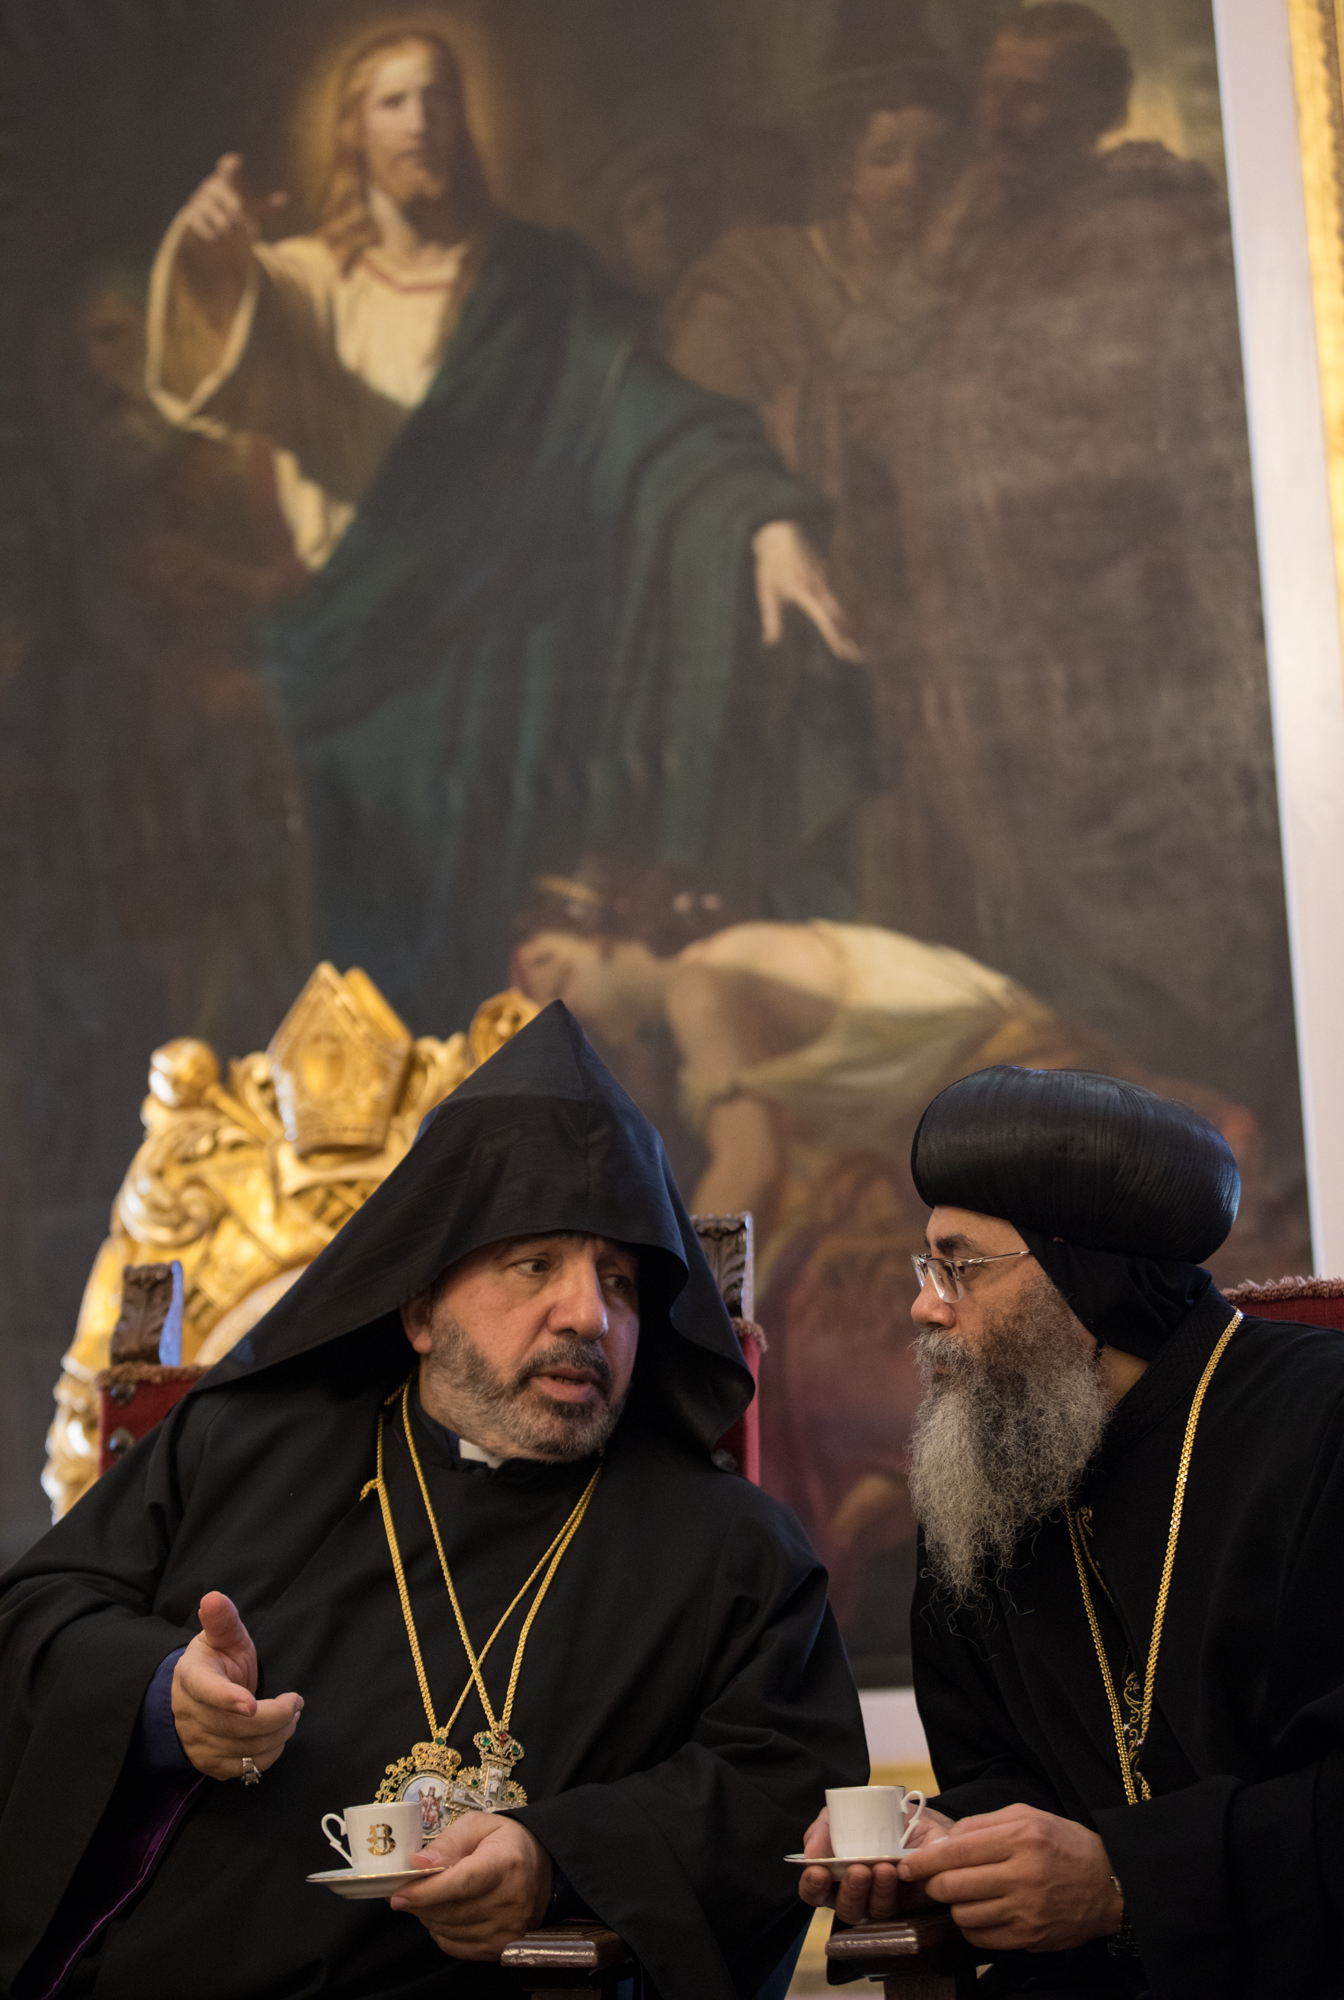 The Armenian and Coptic bishops talk during a Christmas gathering.